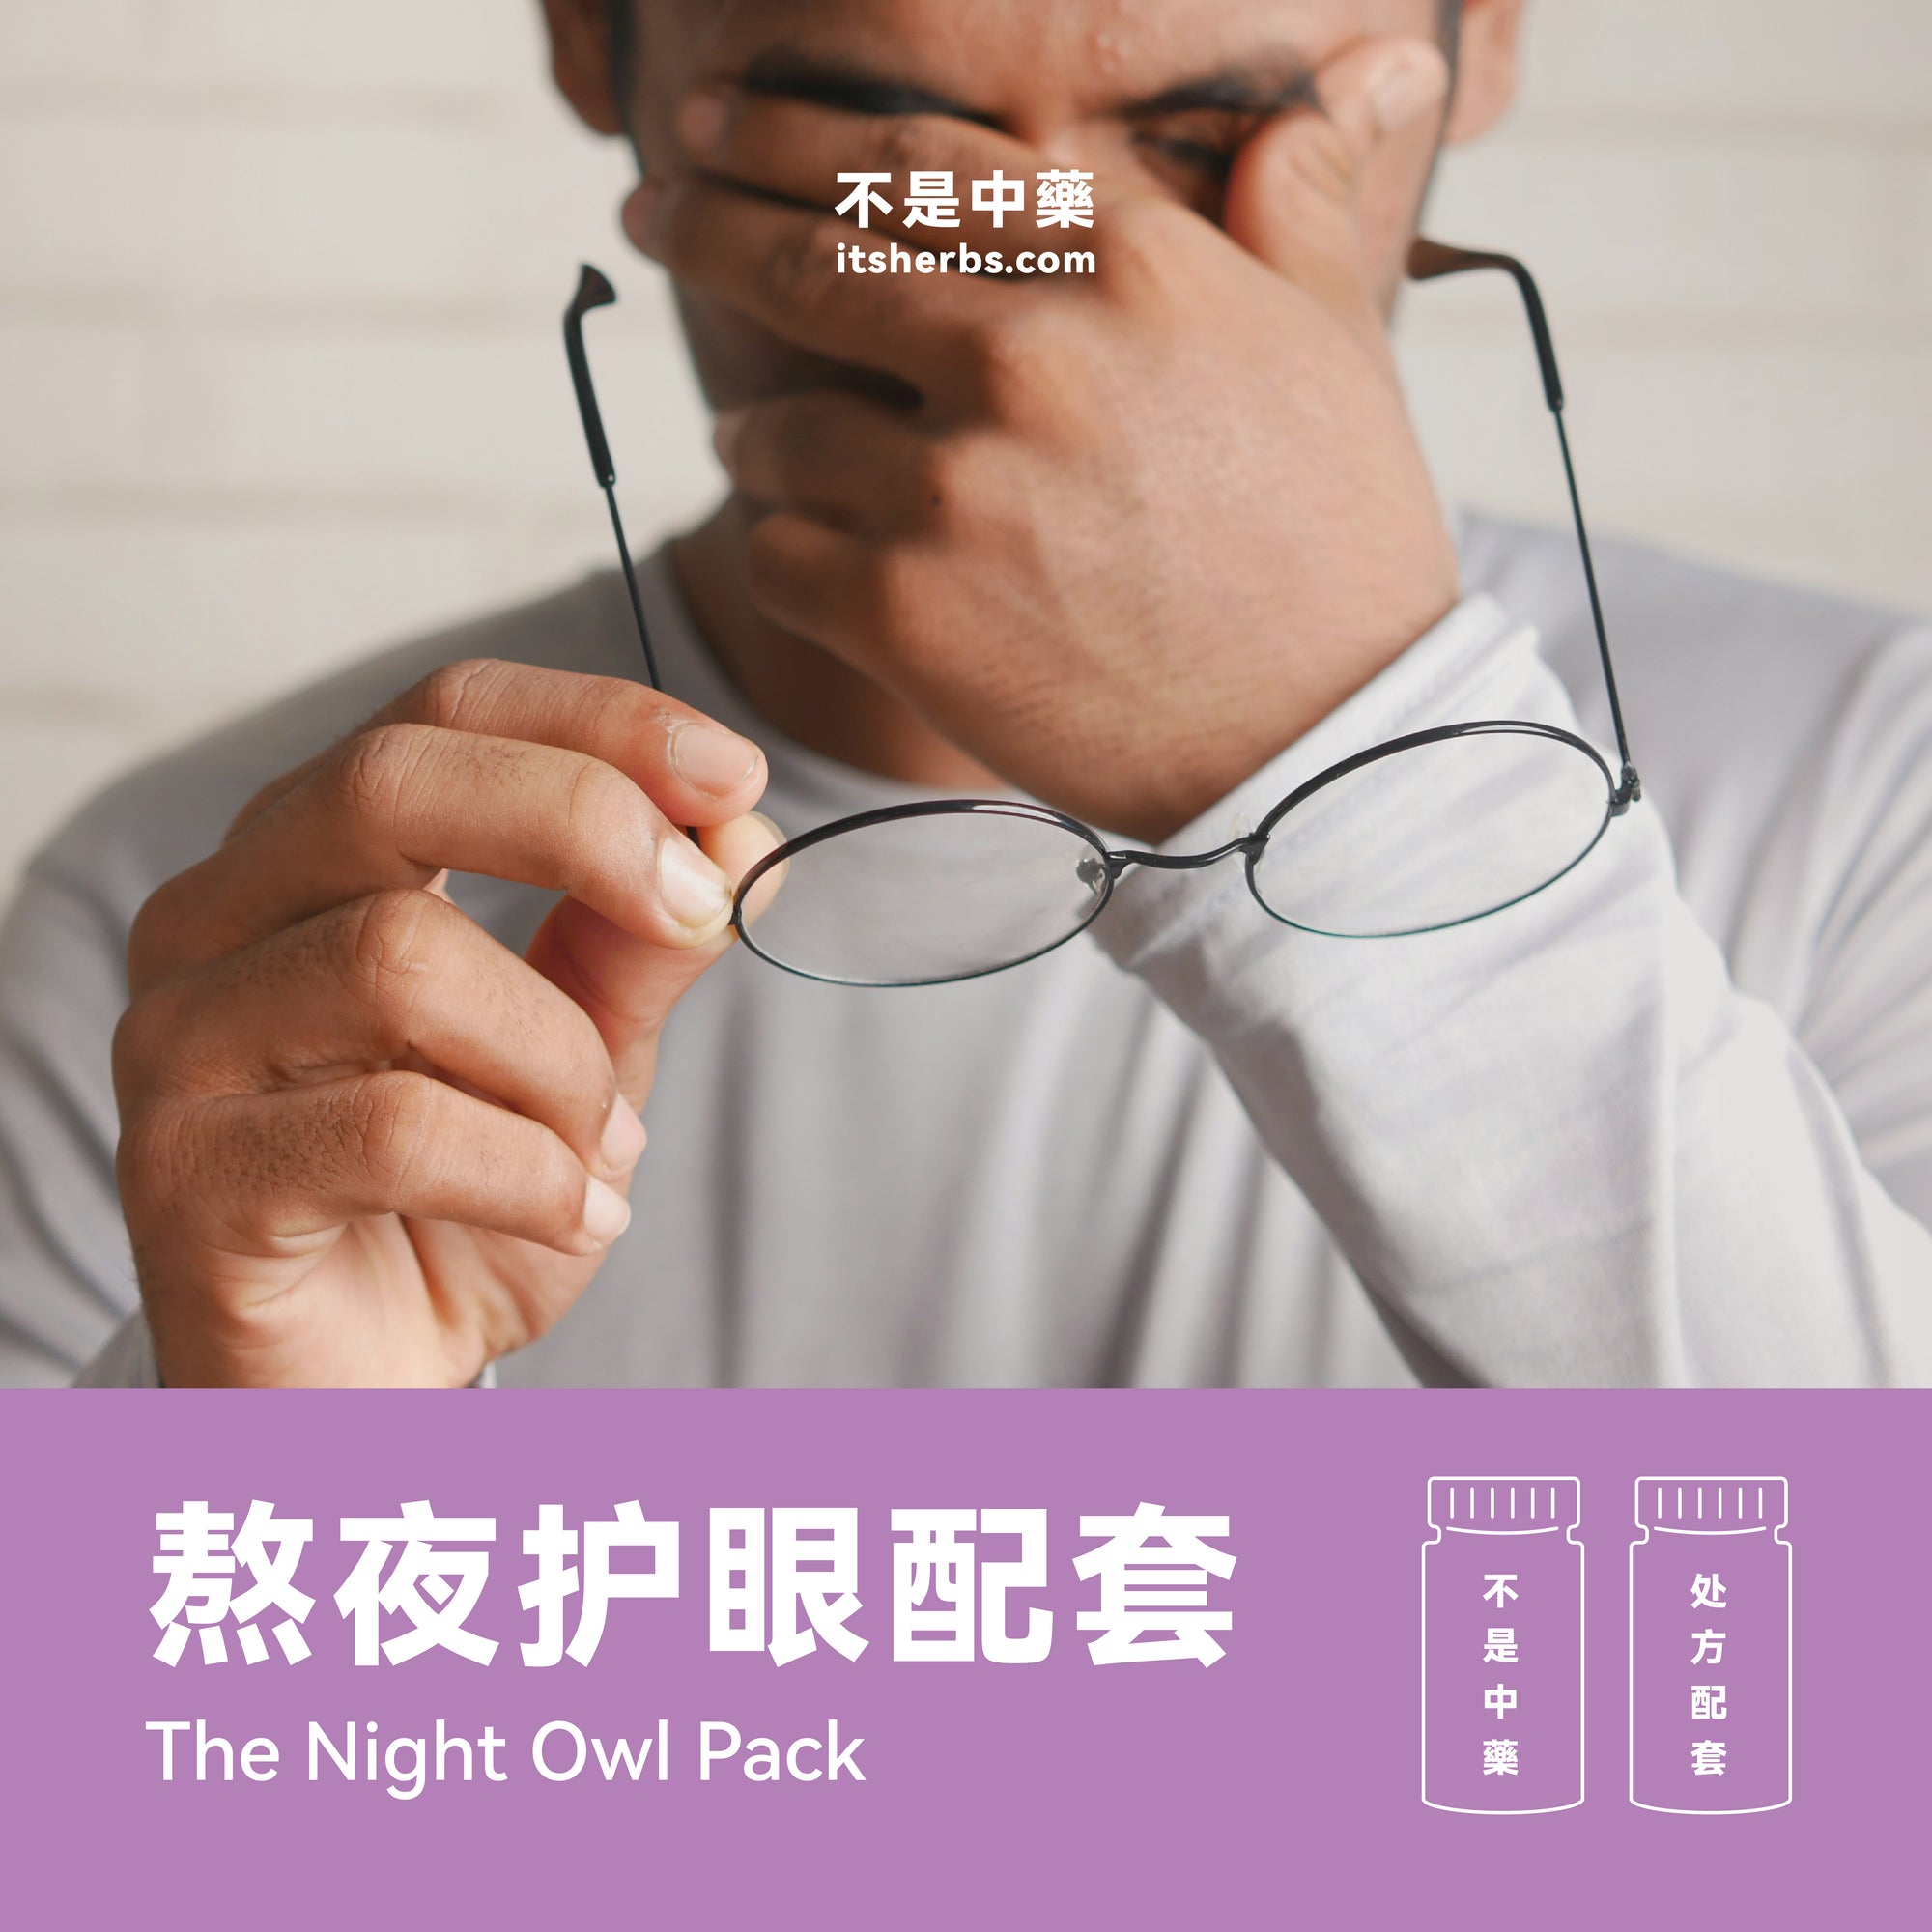 The Night Owl Pack